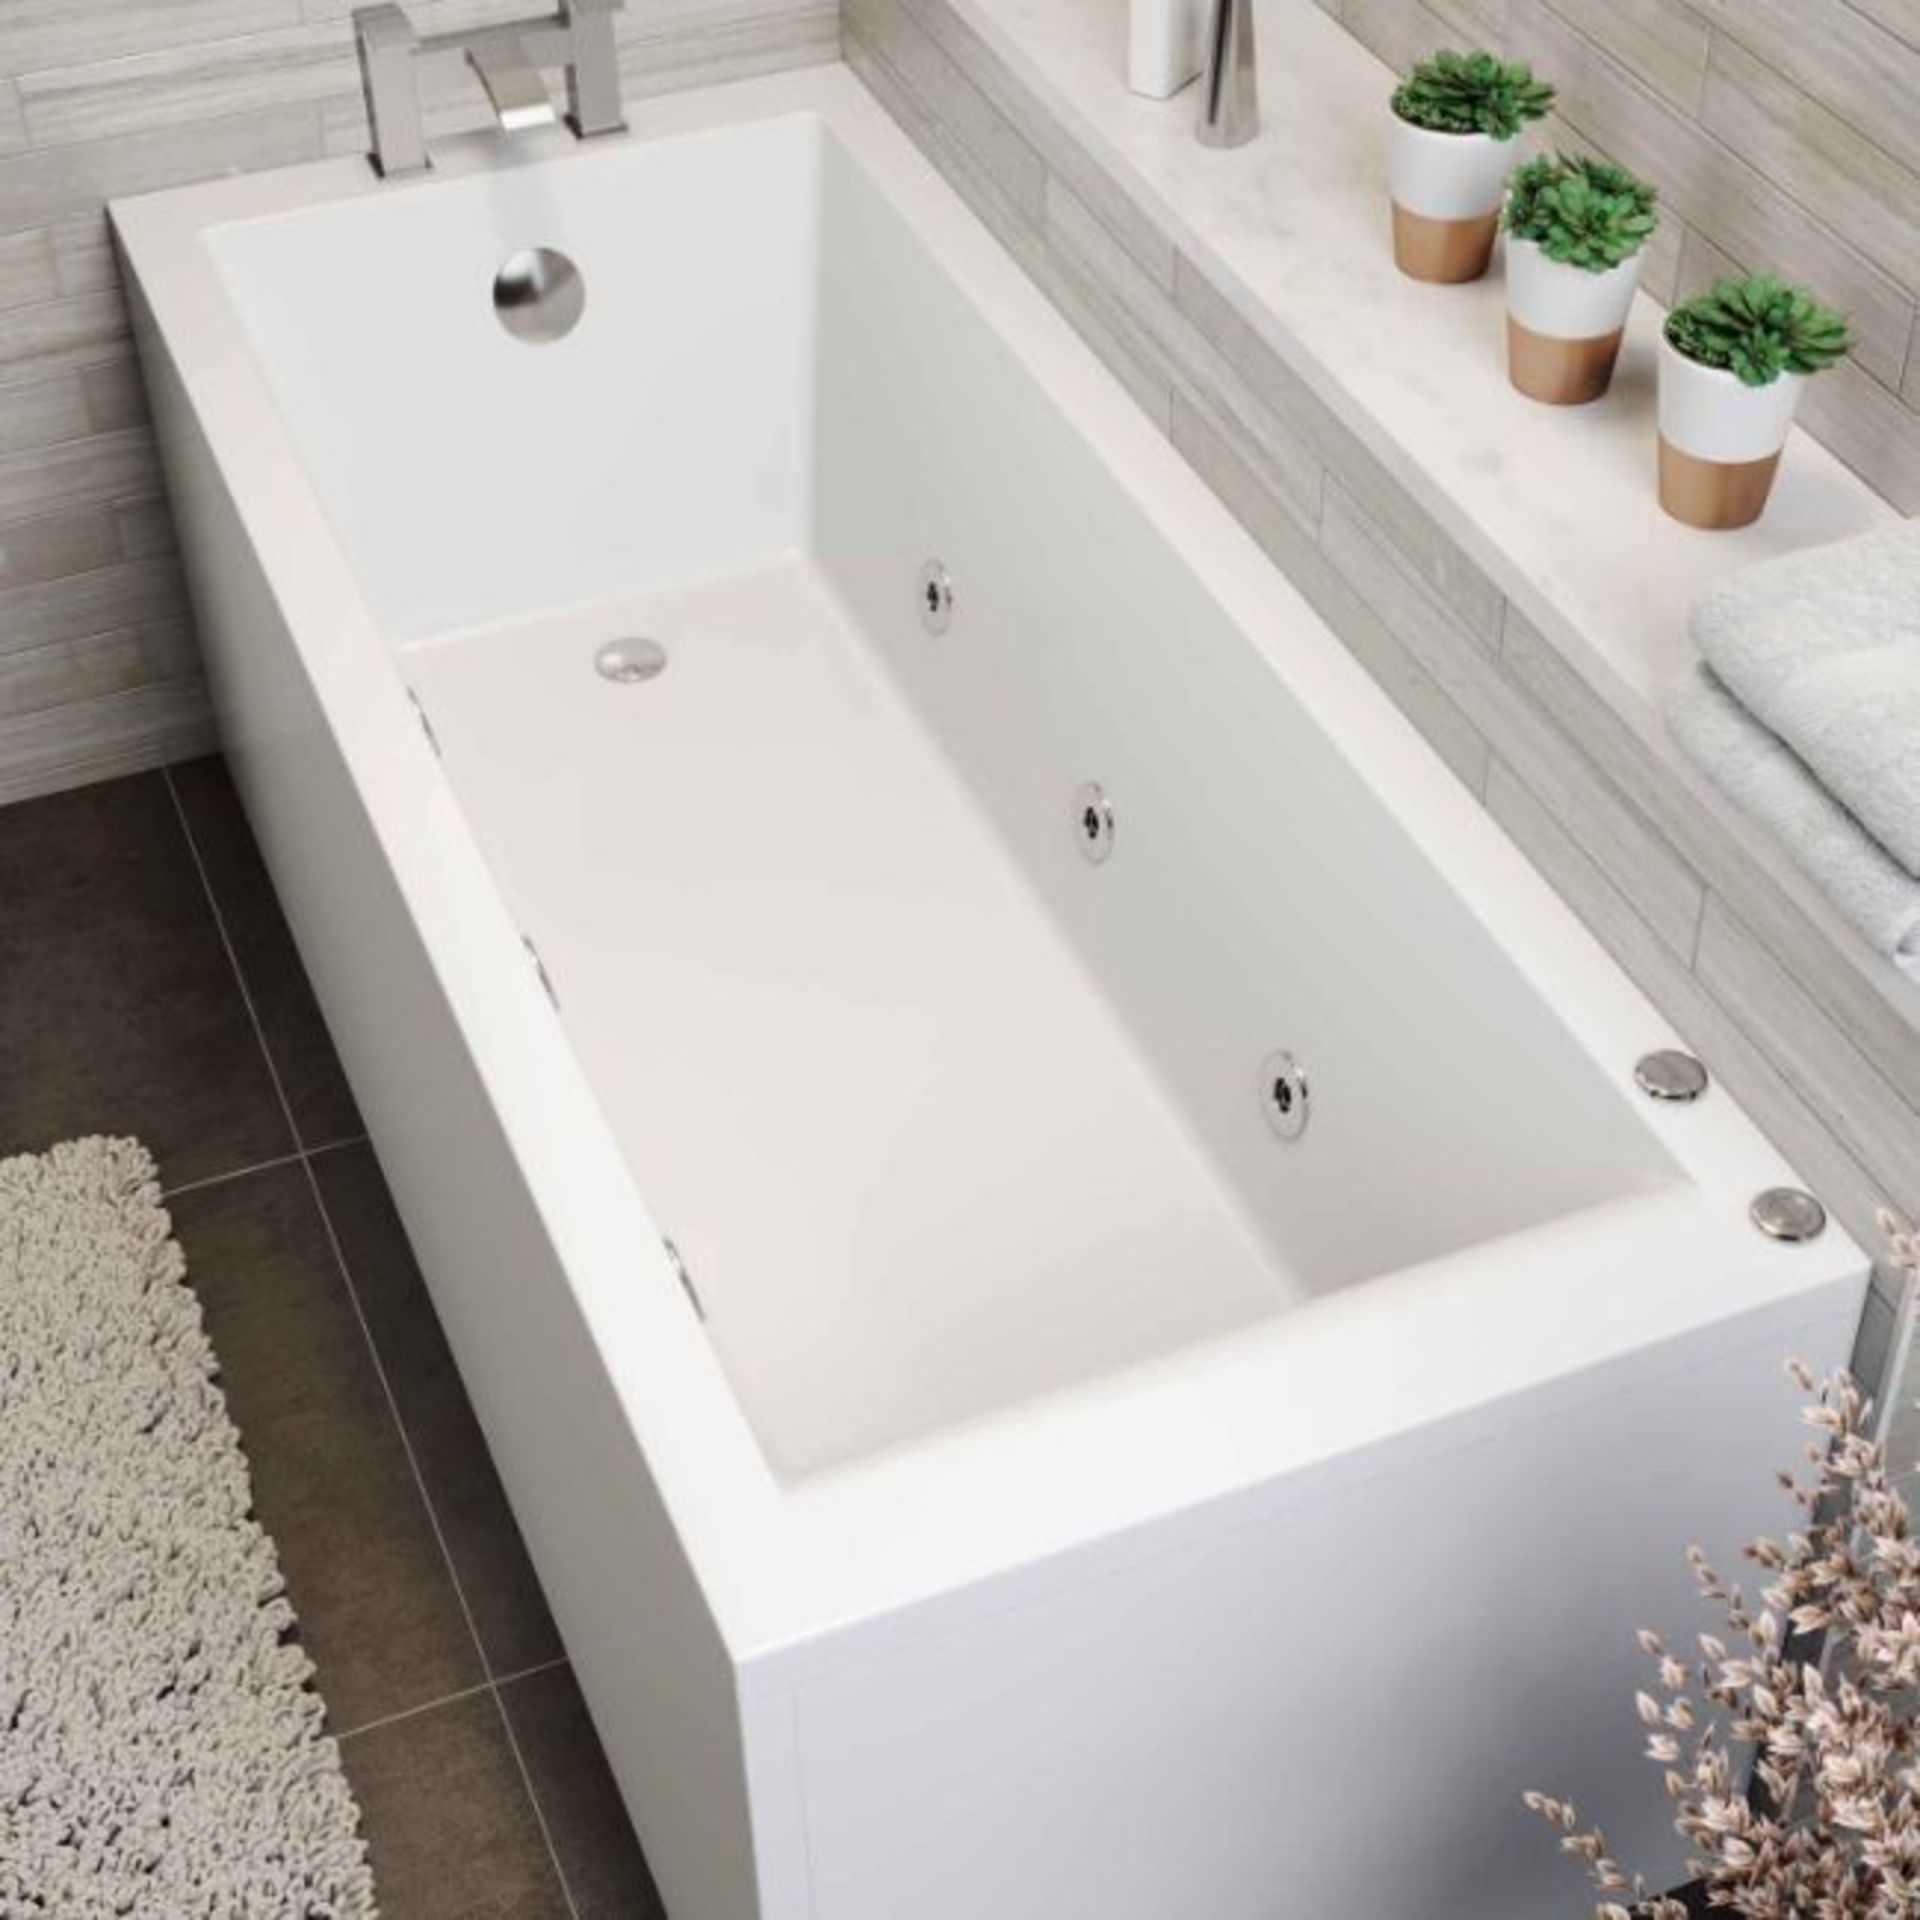 New 1700 x 700 x 545mm Whirlpool Jacuzzi Single-Ended Bath - 6 Jets.RRP £1,299.99.Spa Experience! - Image 2 of 3